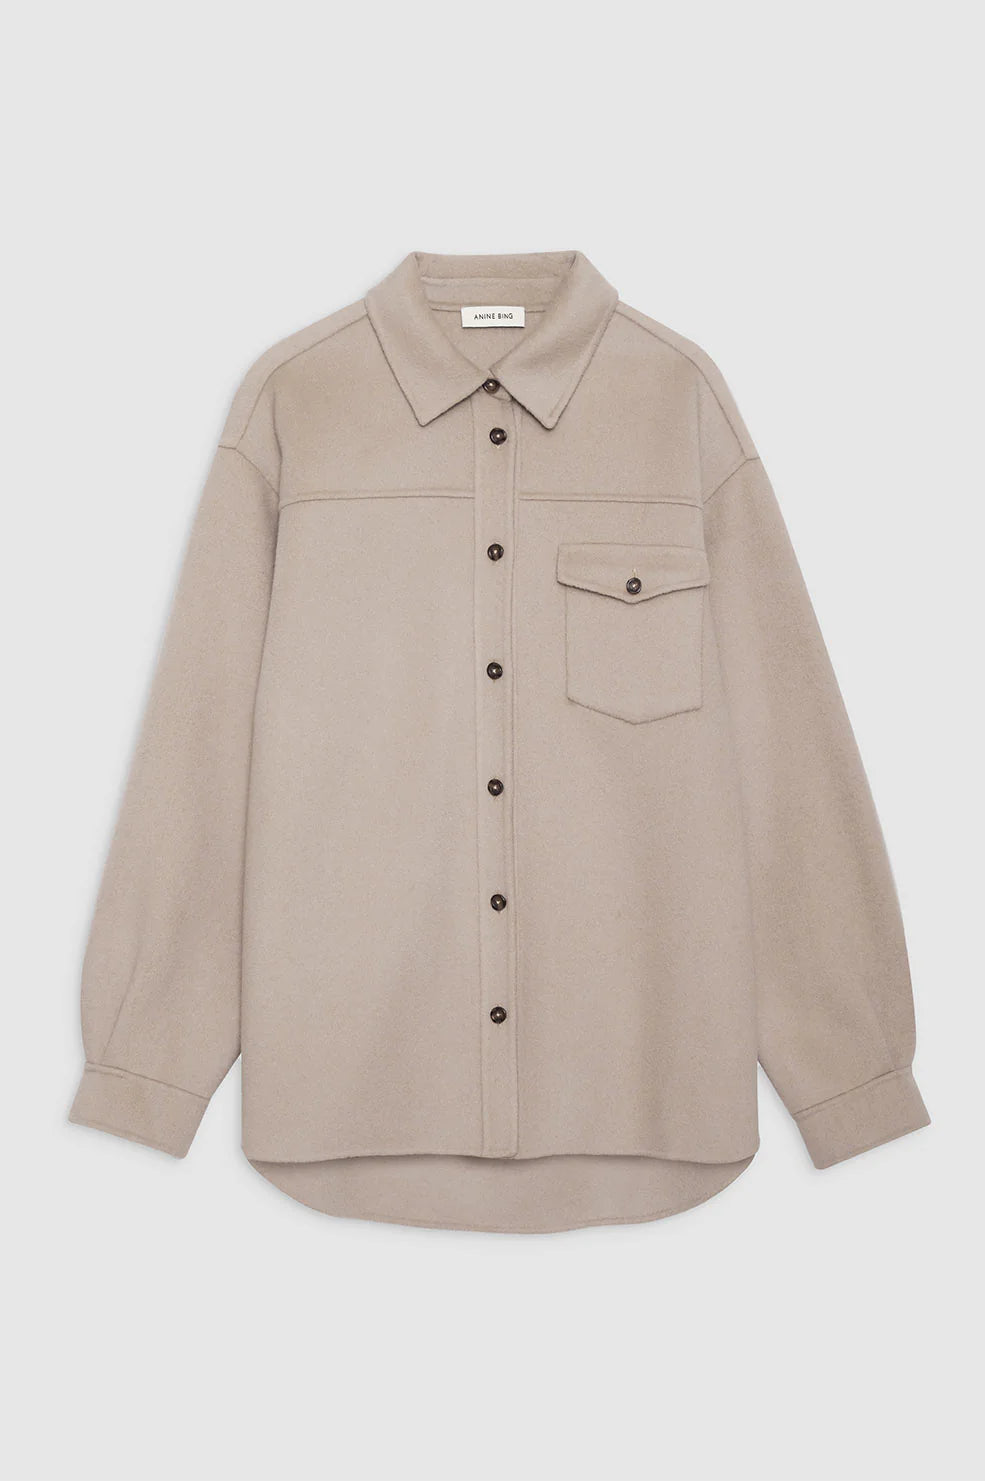 Anine Bing - Simon Shirt in Taupe Cashmere Blend